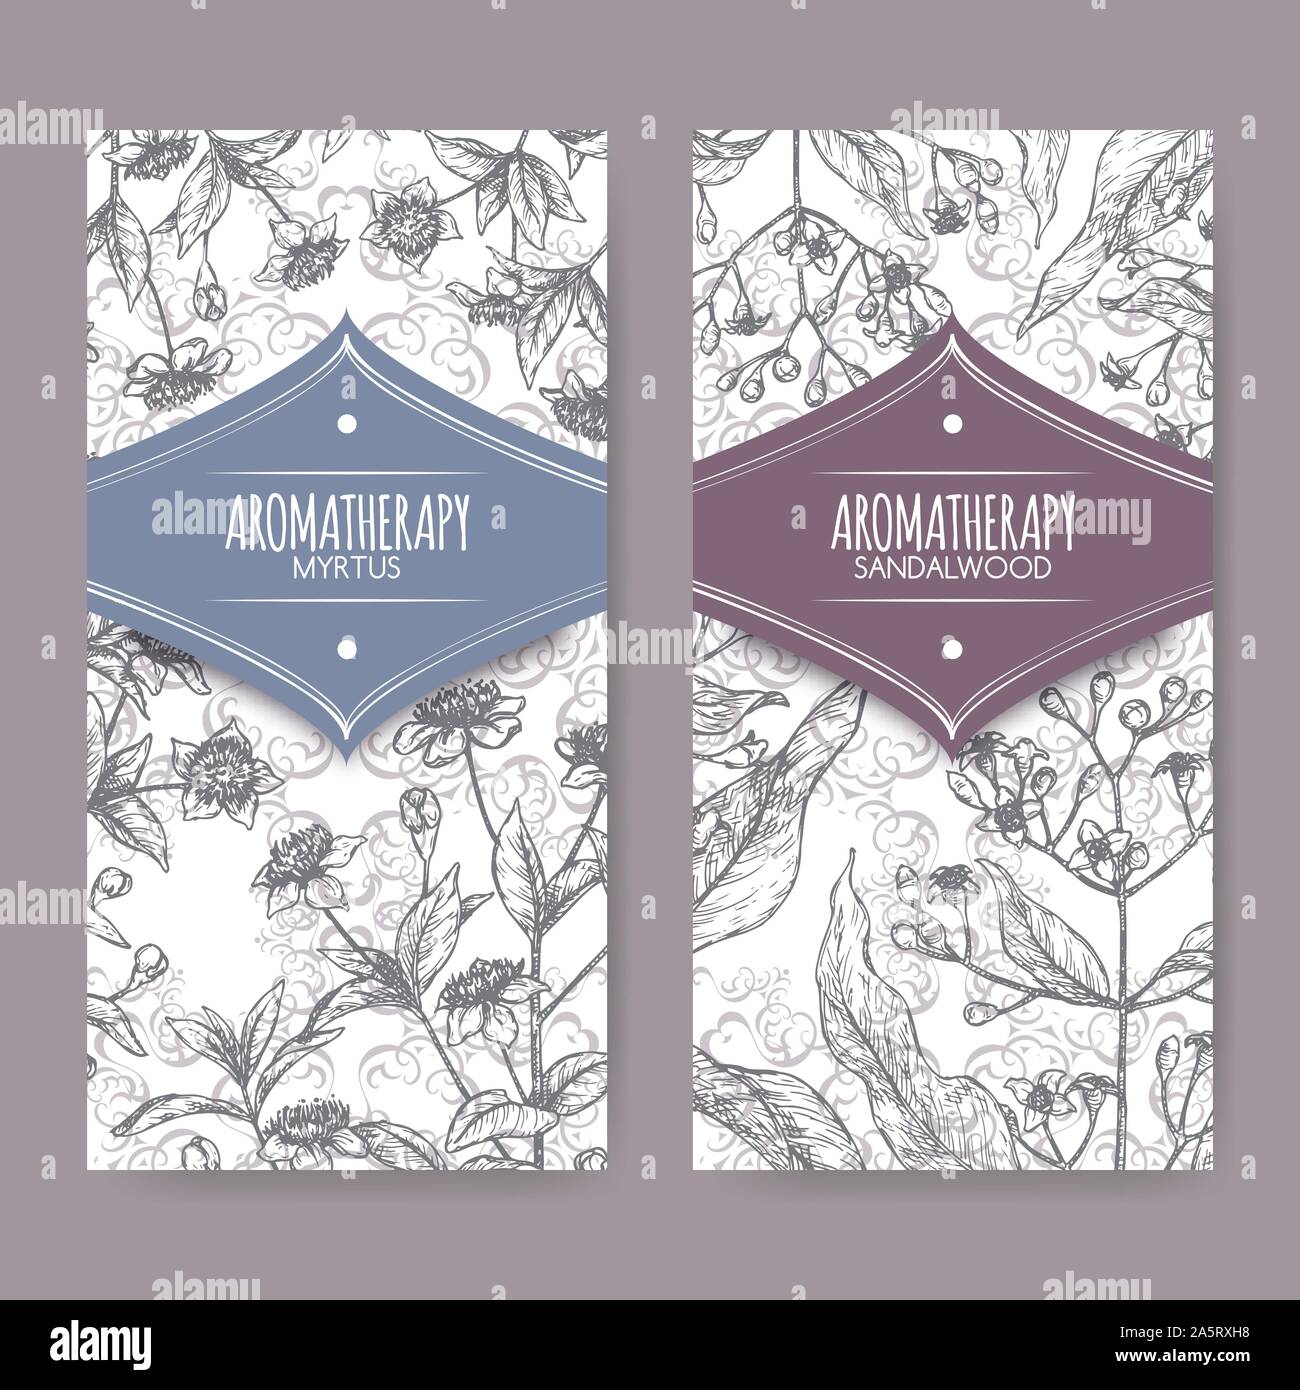 Two labels with Common myrtle aka Myrtus communis and Indian sandalwood aka Santalum album sketch on elegant lace background. Great for traditional me Stock Vector